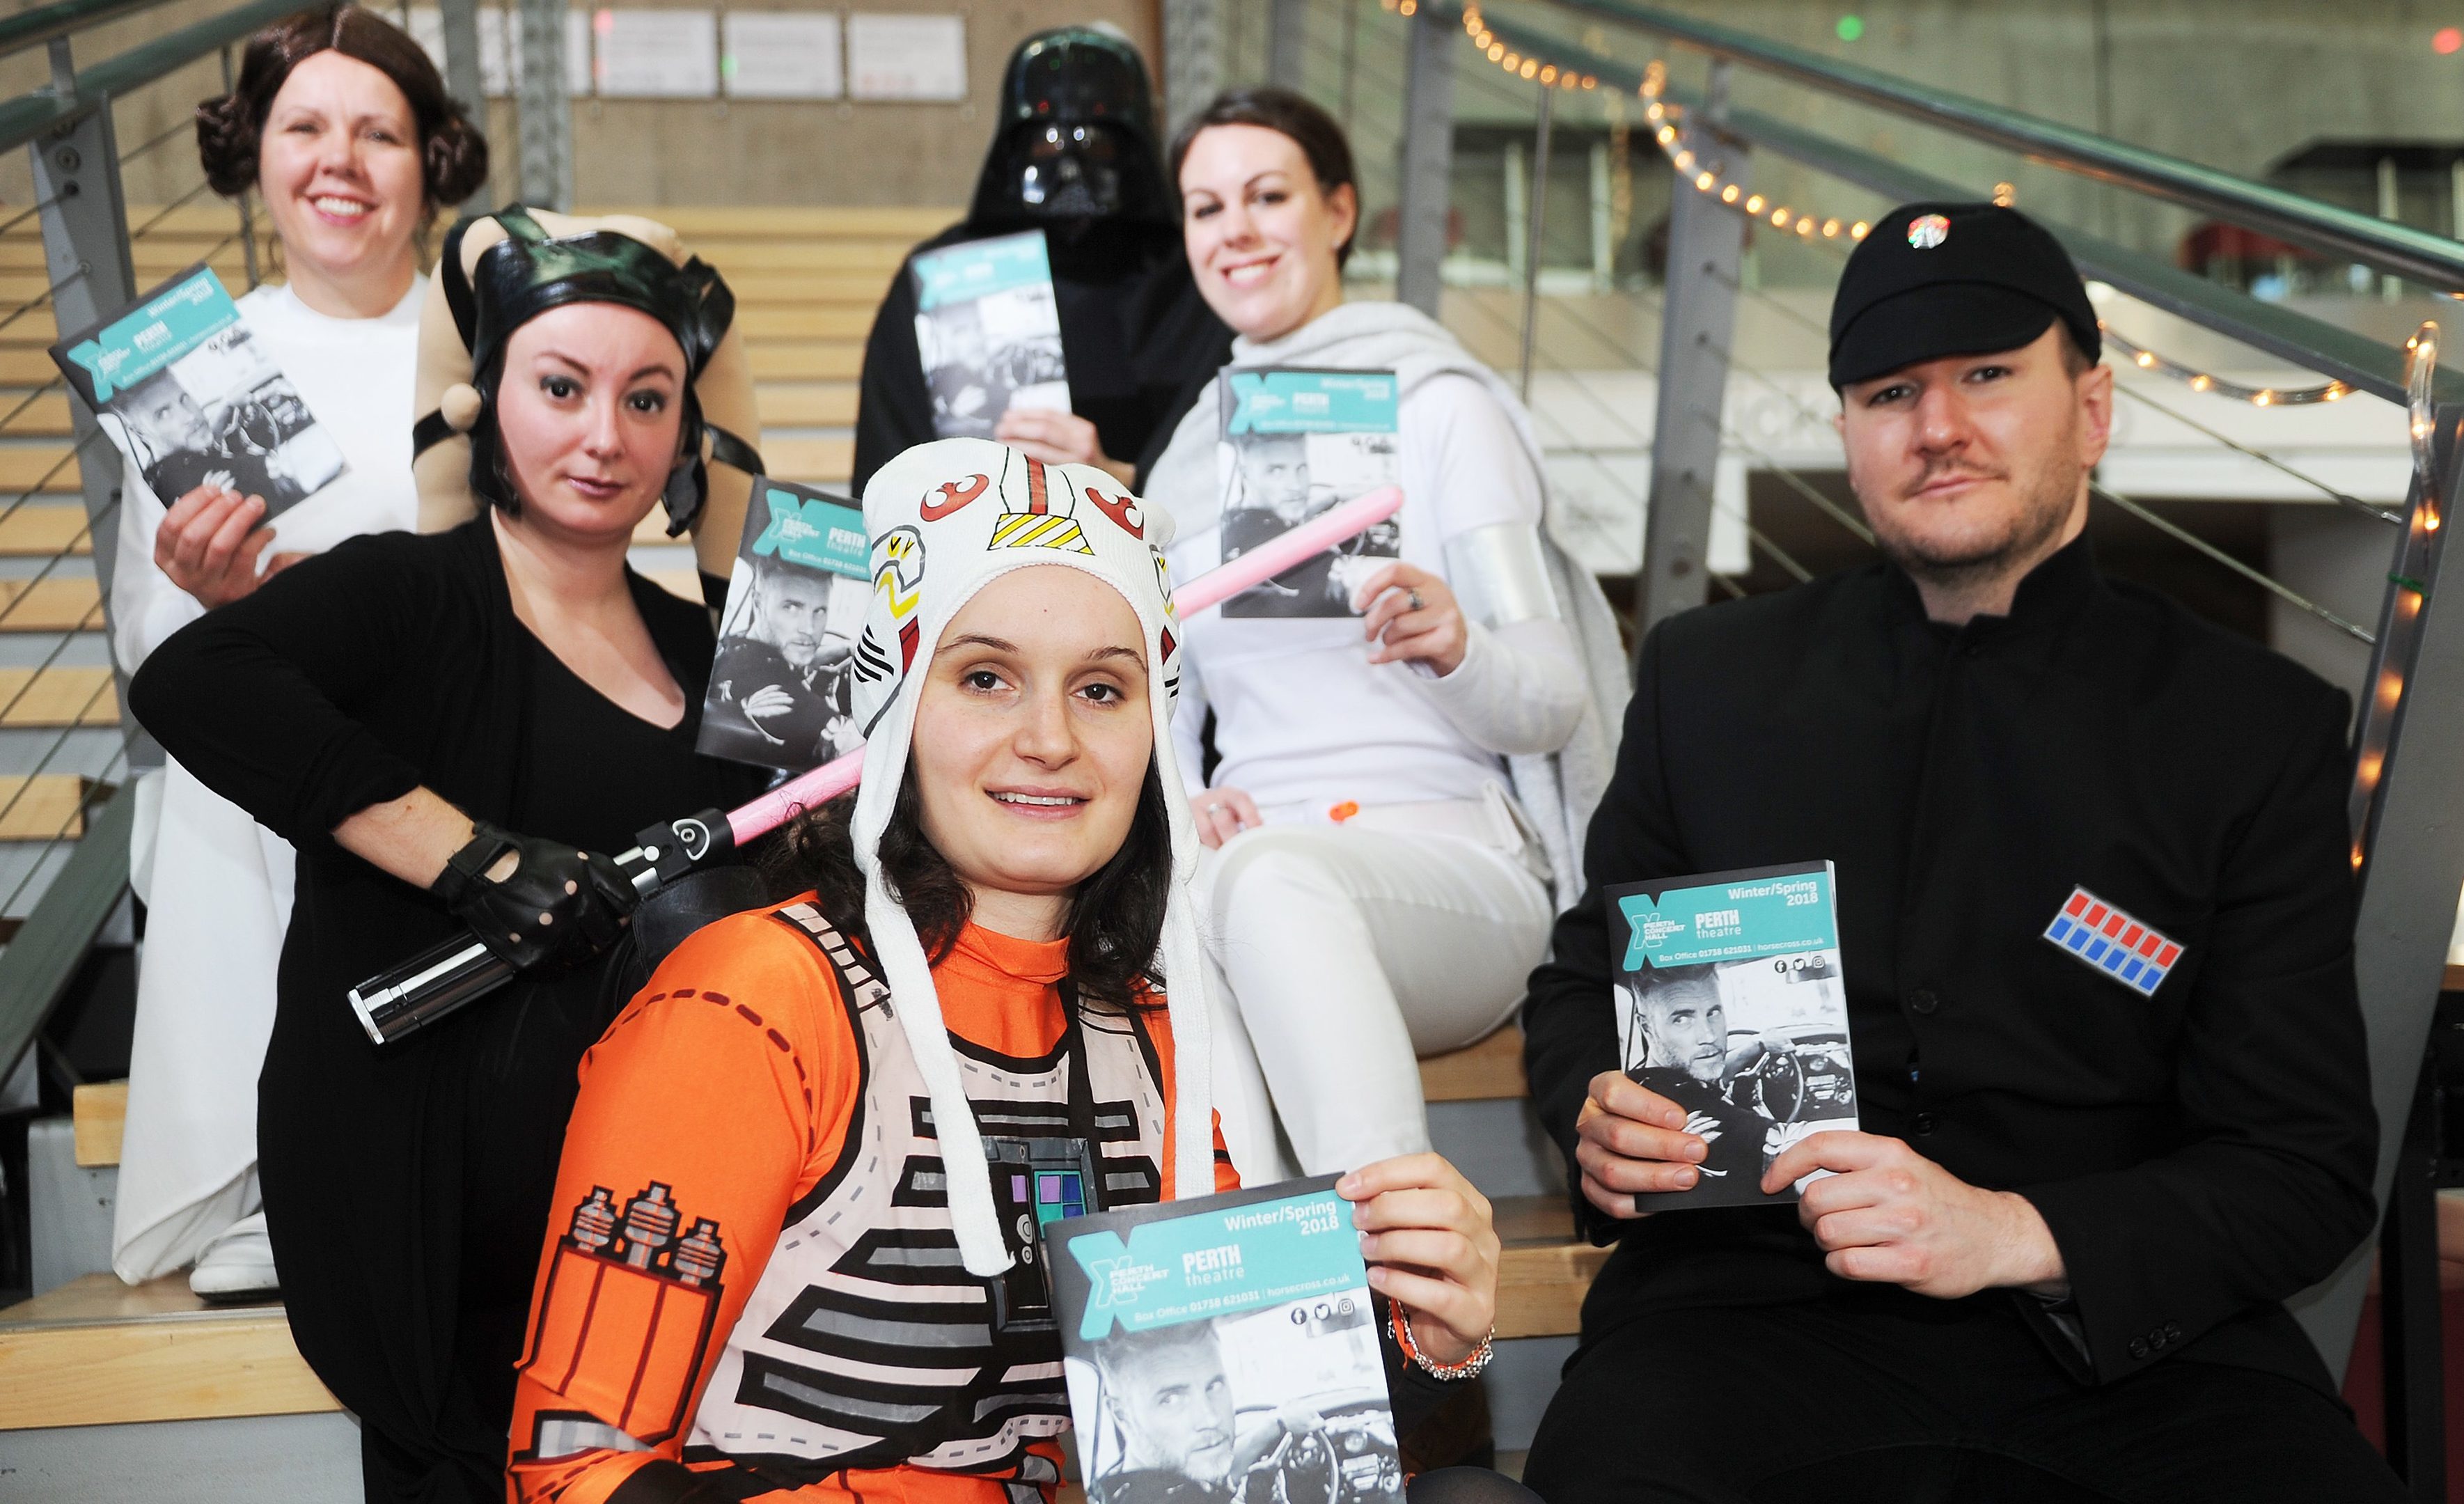 Perth Concert Hall staff in Star Wars outfits.